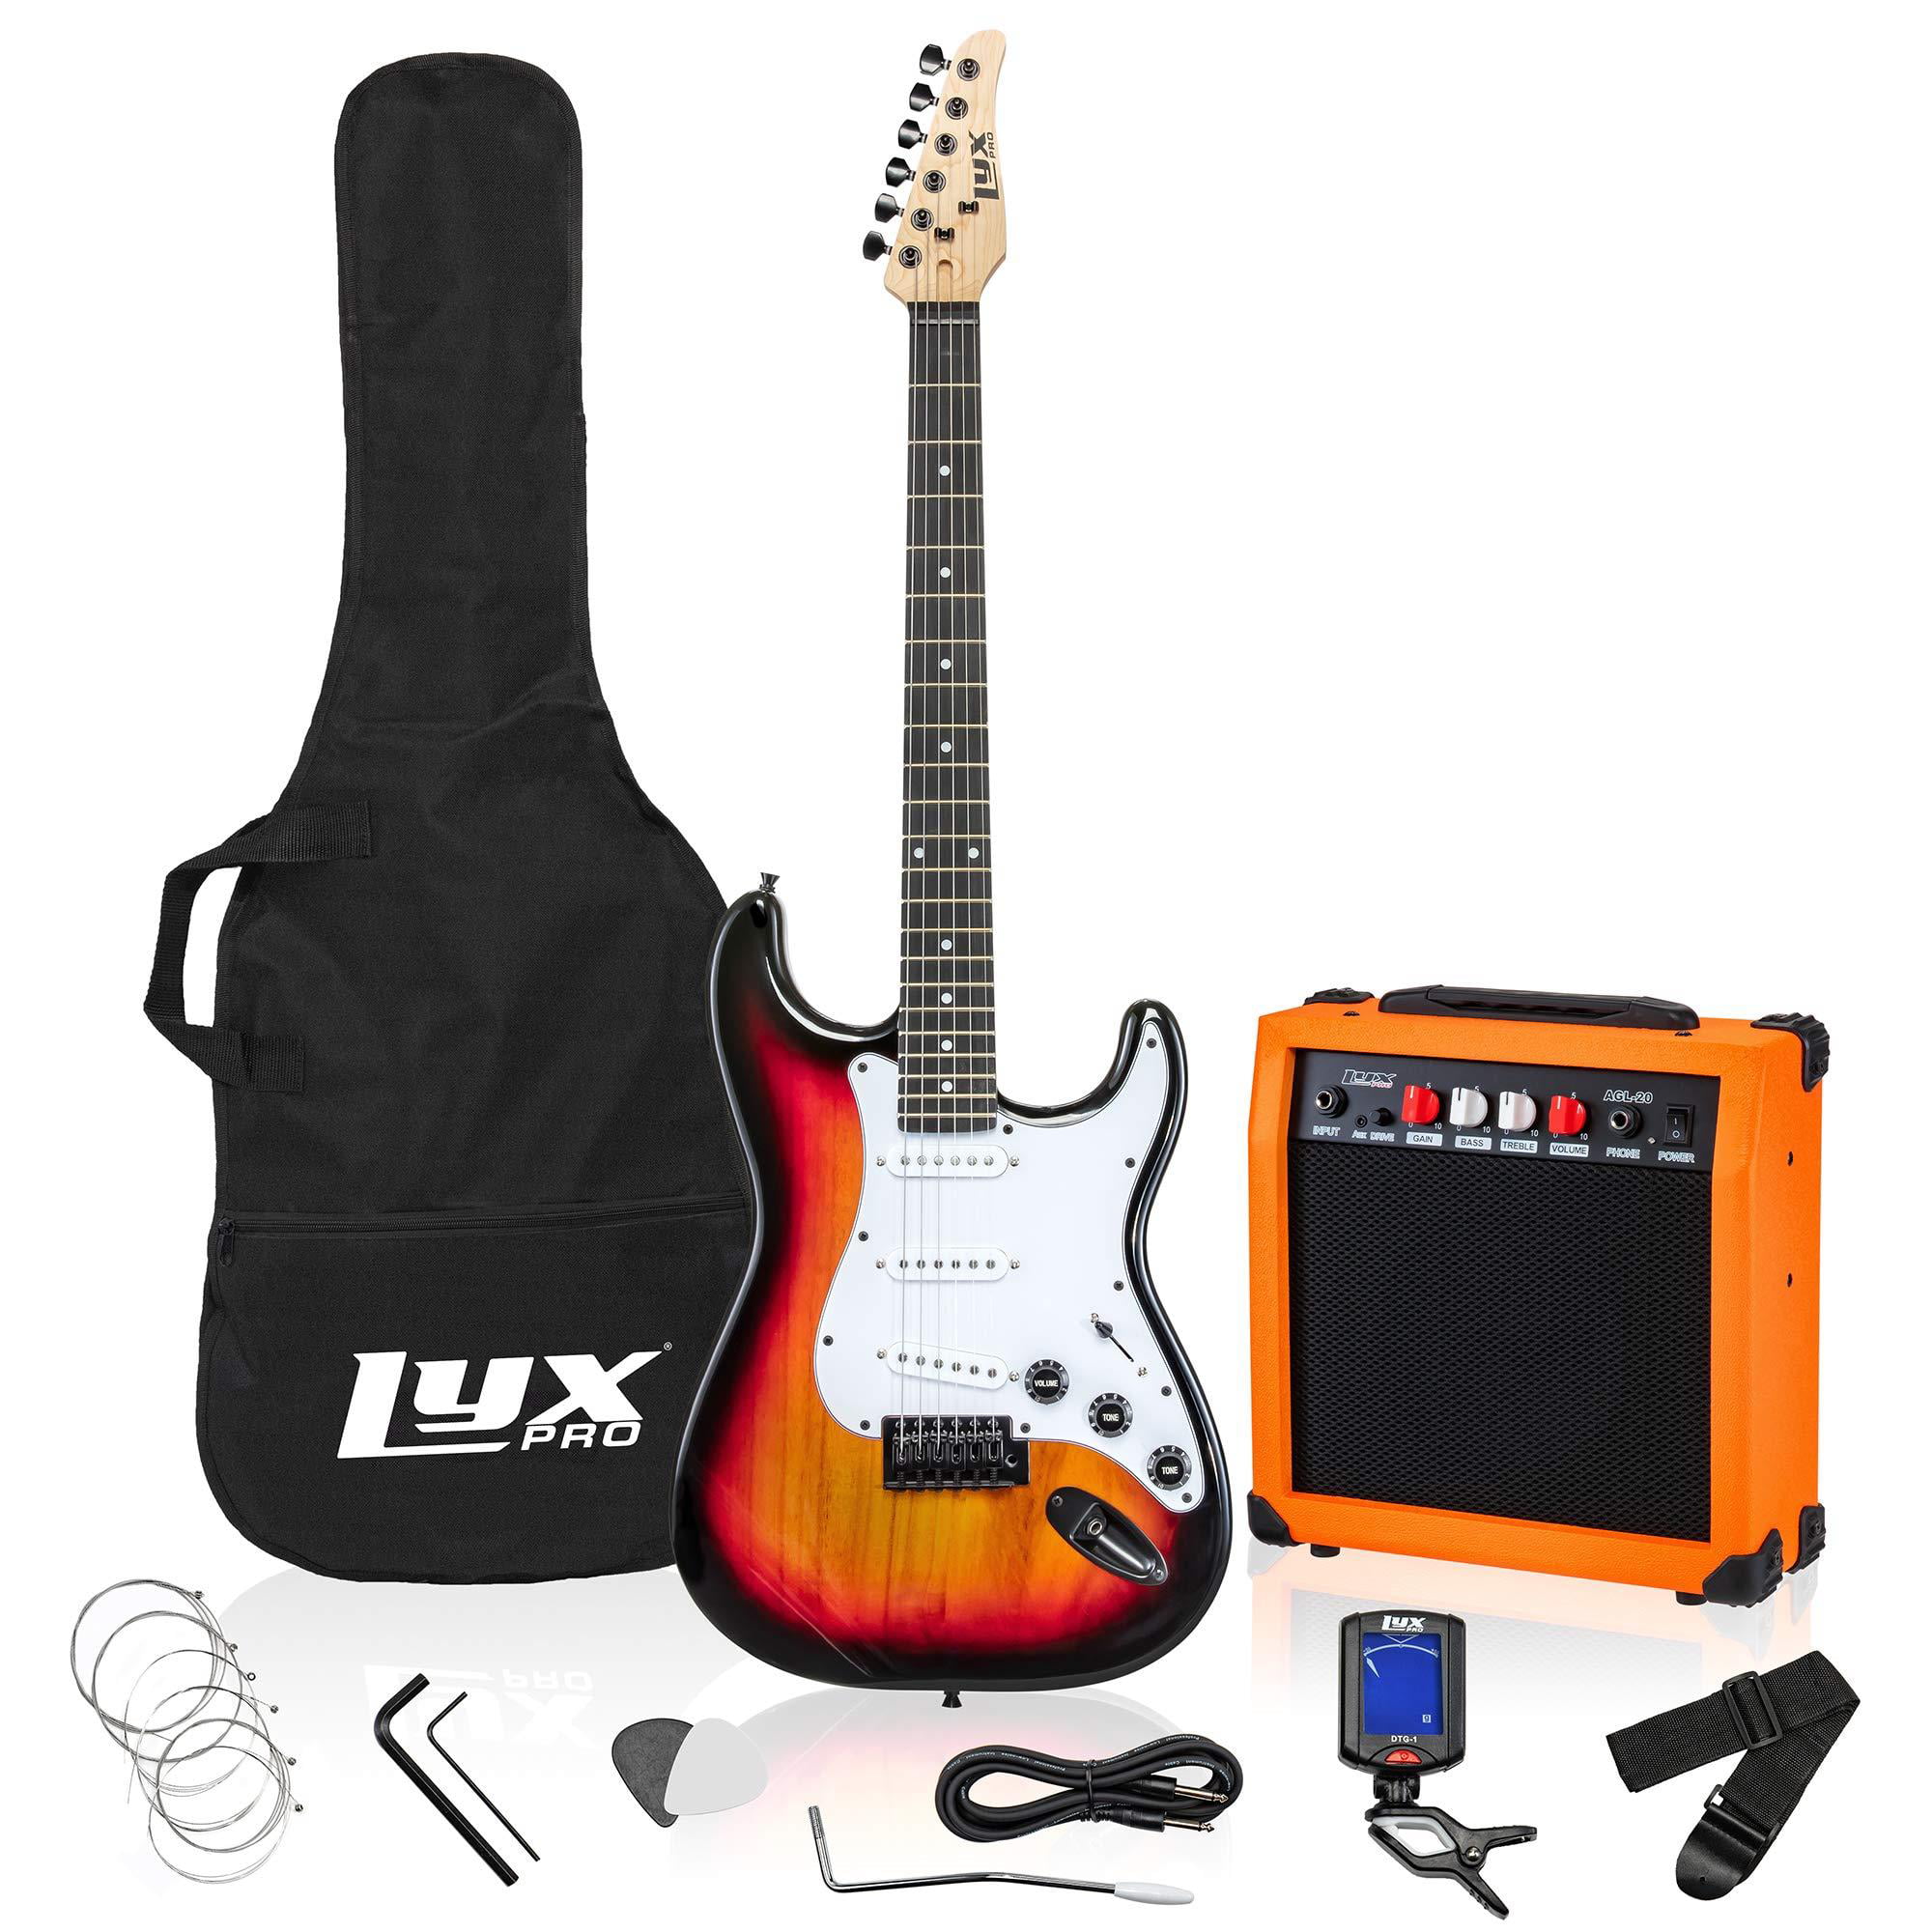 LyxPro Electric Guitar Package Complete Kit With 20 Watt AMP, Sunburst